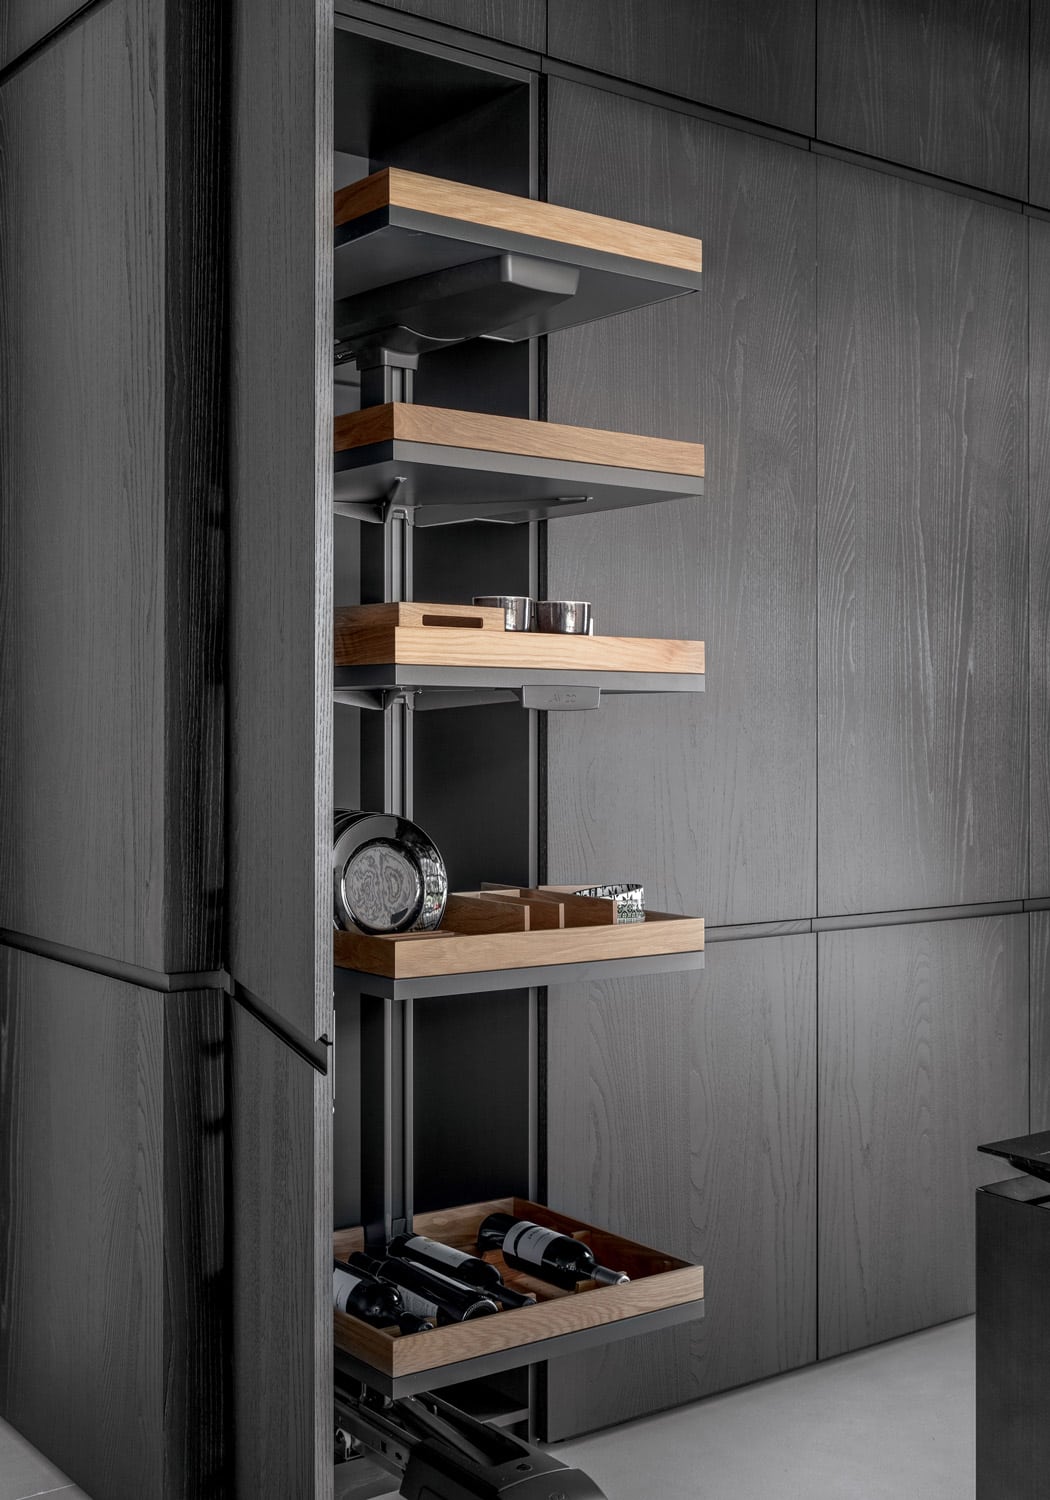 The side column features an extractable system of adjustable shelves, each with a customized tray in light wood to hold wine bottles, plates, containers, and other pantry items. 